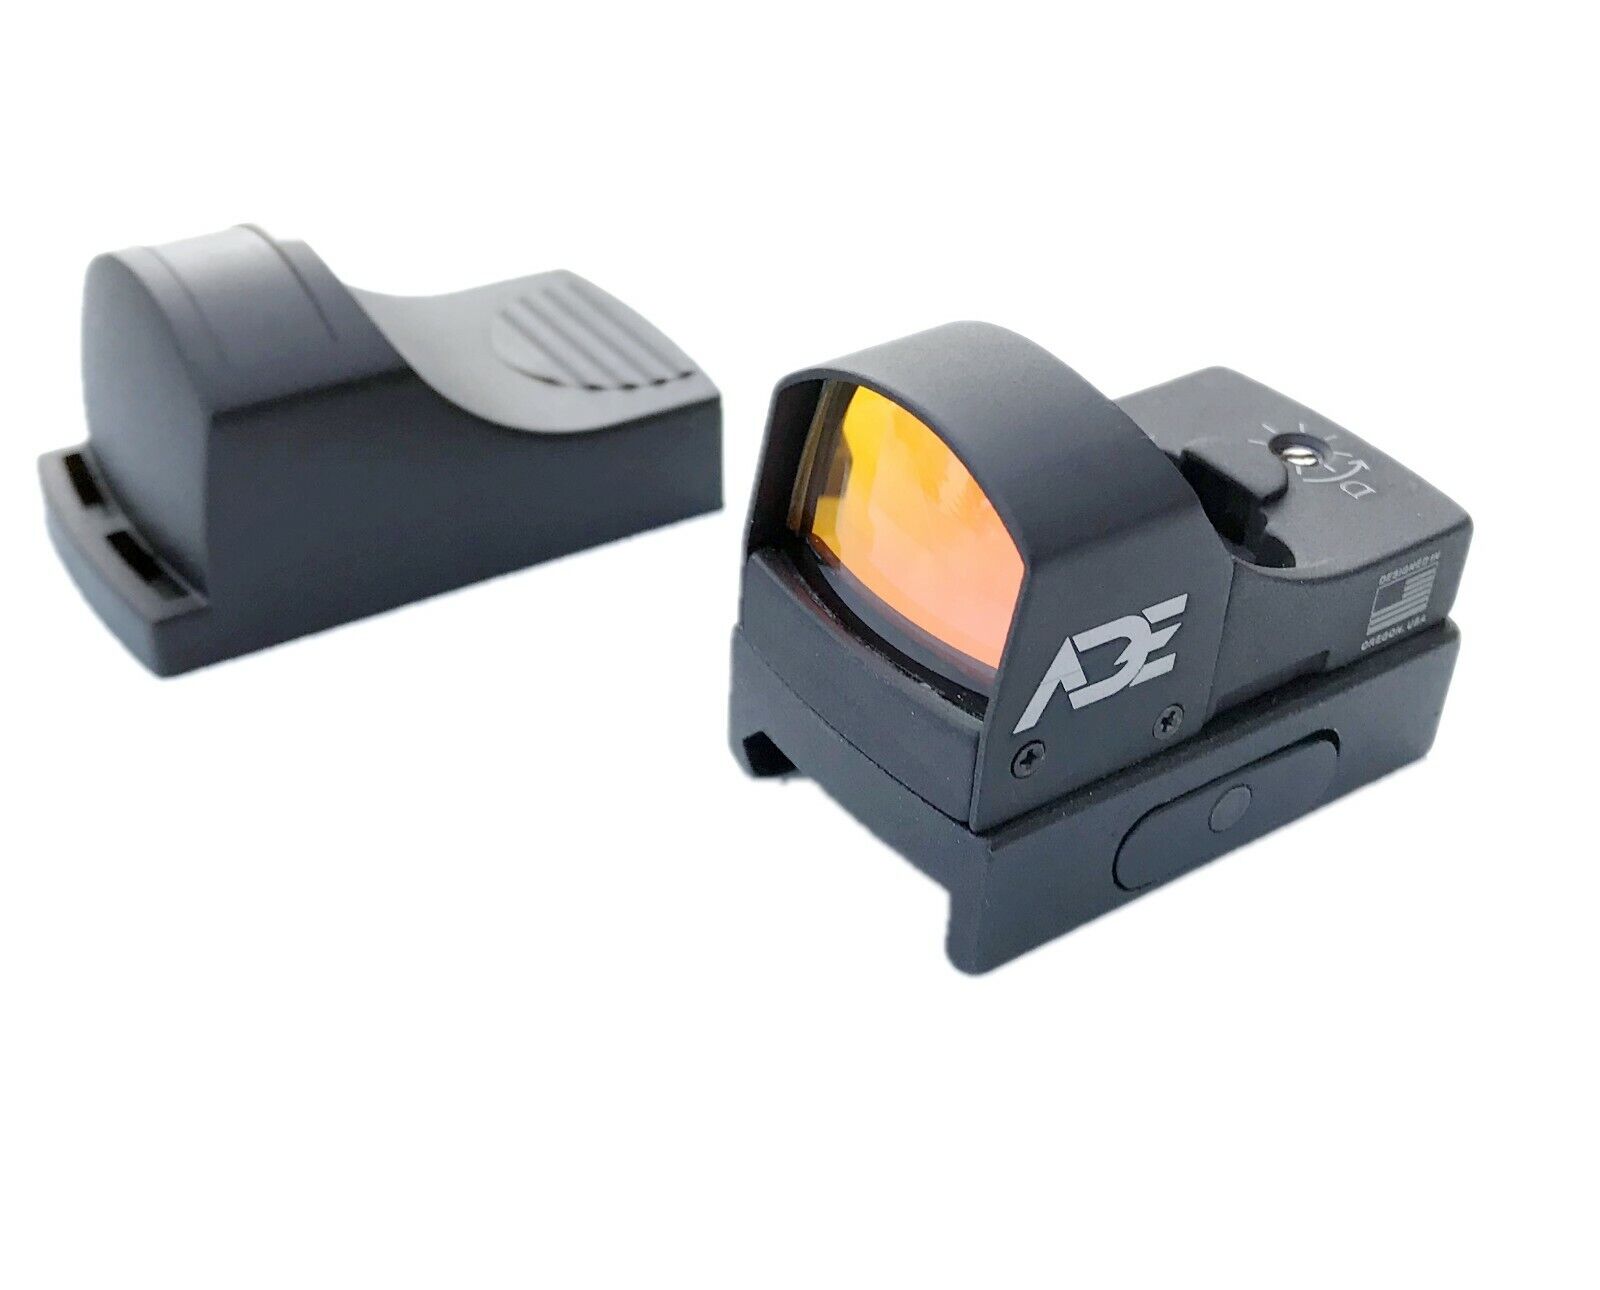 ADE RD3-002 Red Dot Sight with Weaver-Picatinny Mount for Pistol/Rifle/Shotgun